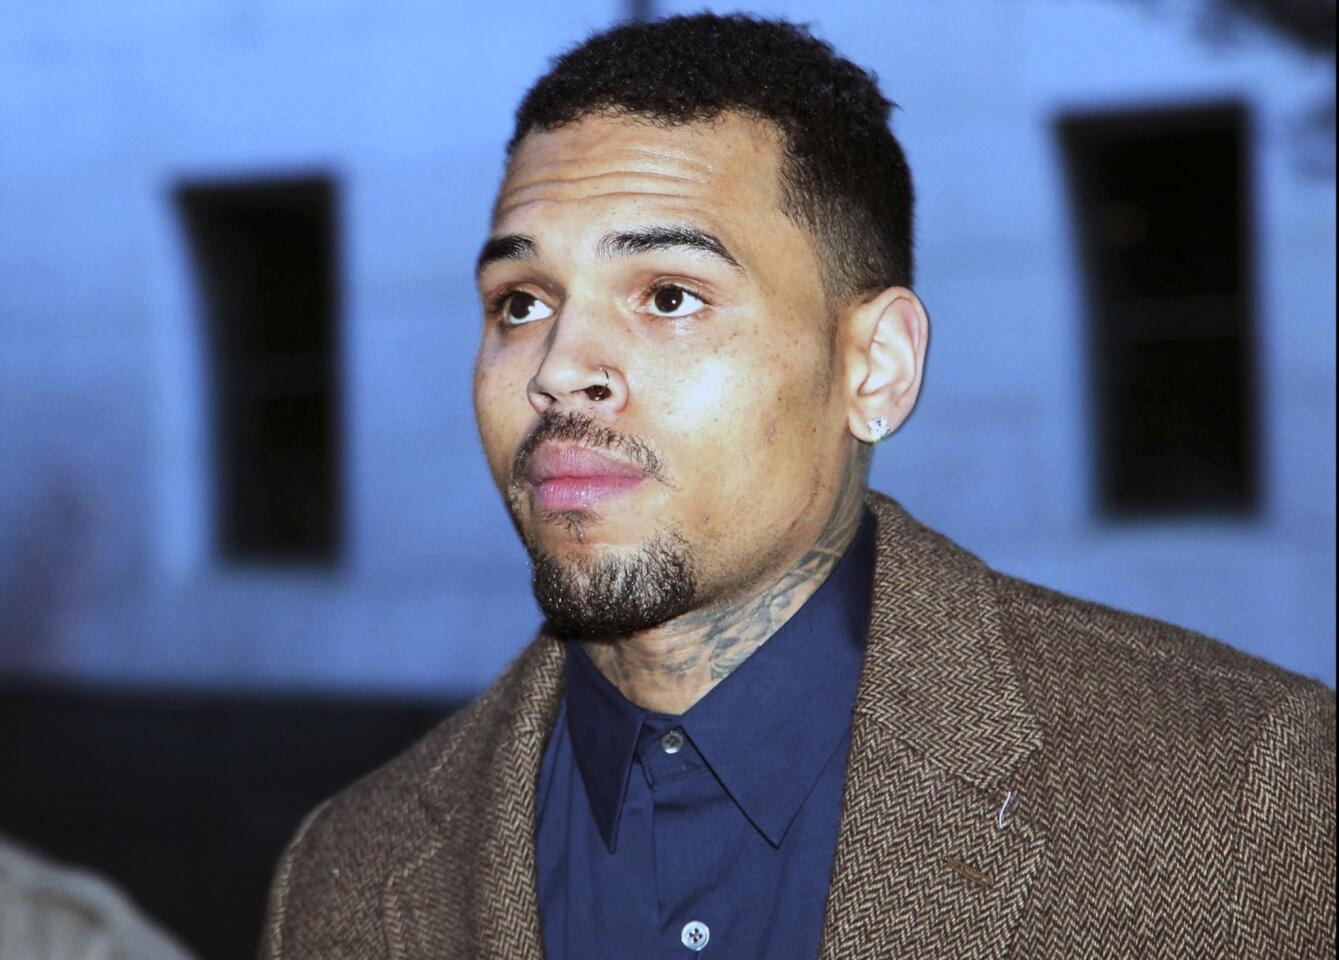 Chris Brown will stay in jail after bodyguard's guilty verdict